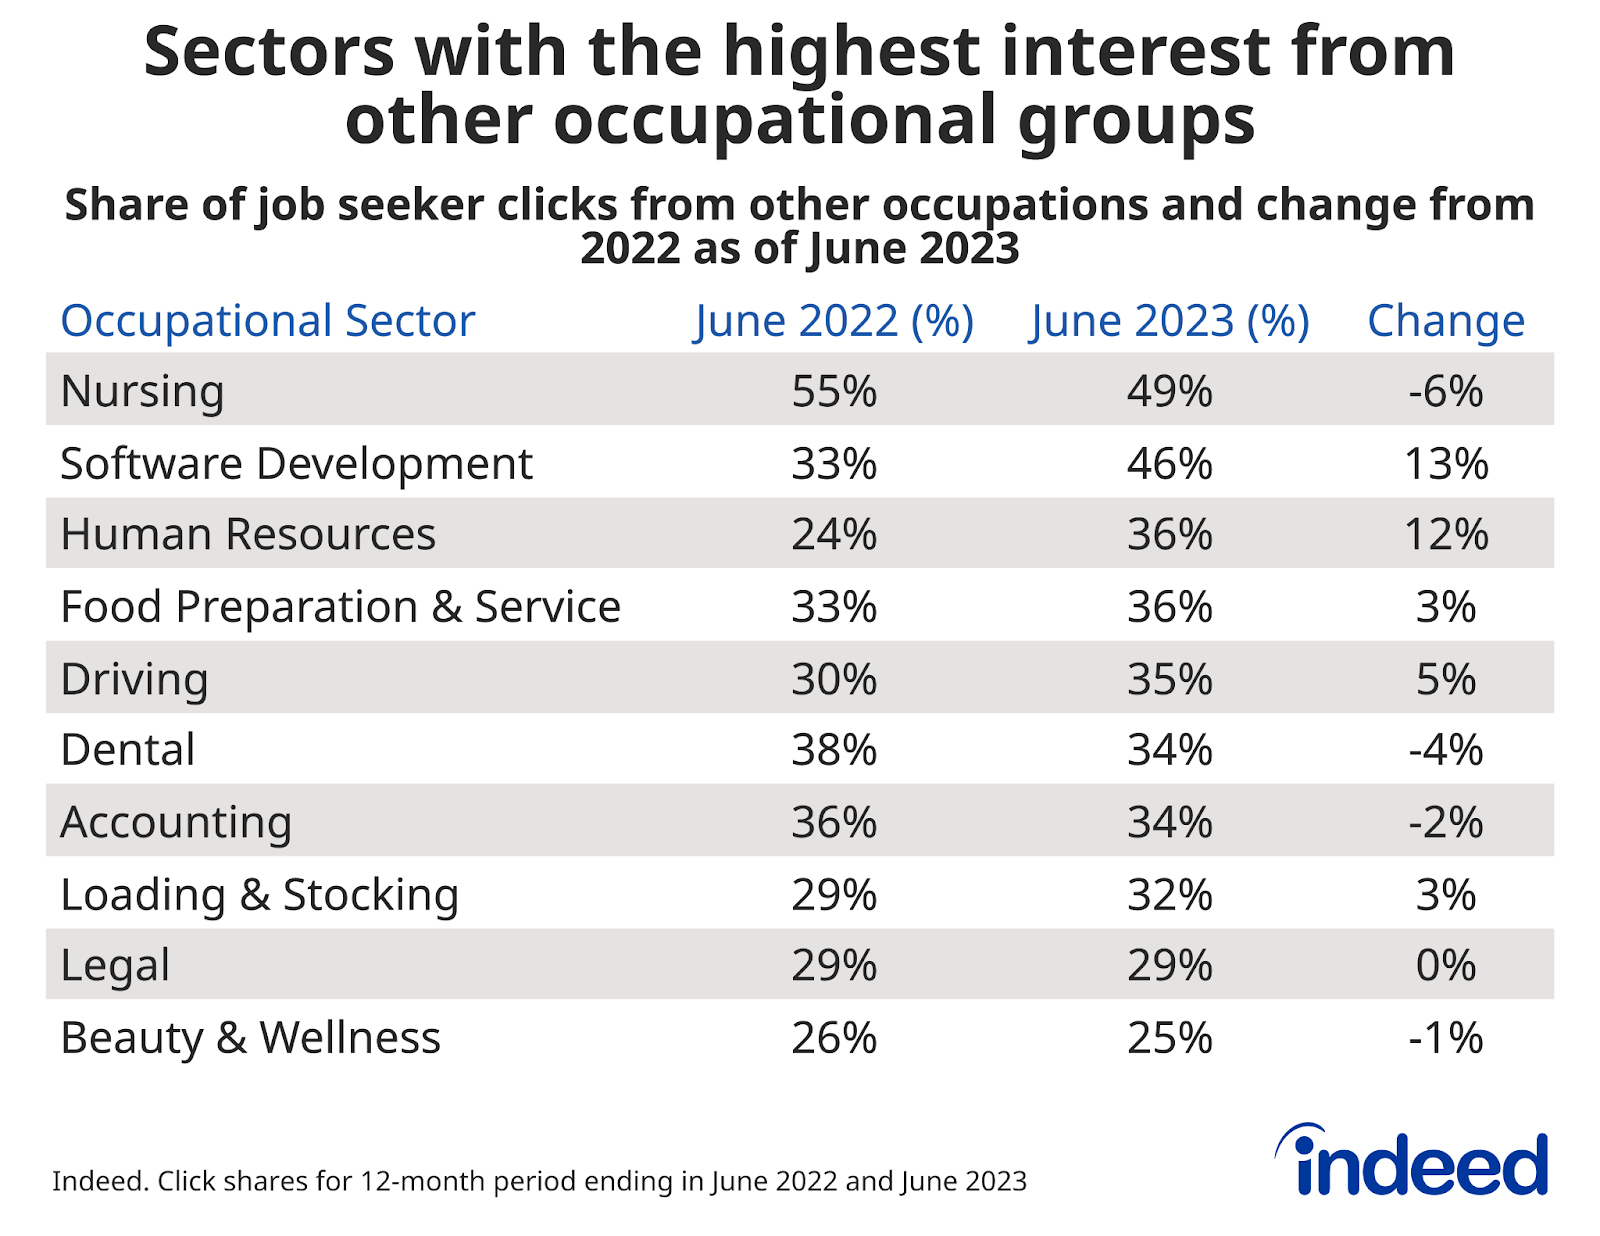 Table titled “Sectors with the highest interest from other occupational groups” with columns named “Occupational Sector,” “June 2022 (%),” “June 2023 (%),” and “Change.” Indeed tracked the percentage of clicks coming to a sector from other fields for the 12 months ending June 2022 and June 2023. Nursing jobs drew the strongest interest from other fields as of June 2023 with 49% of clicks coming from non-nurse job seekers. 